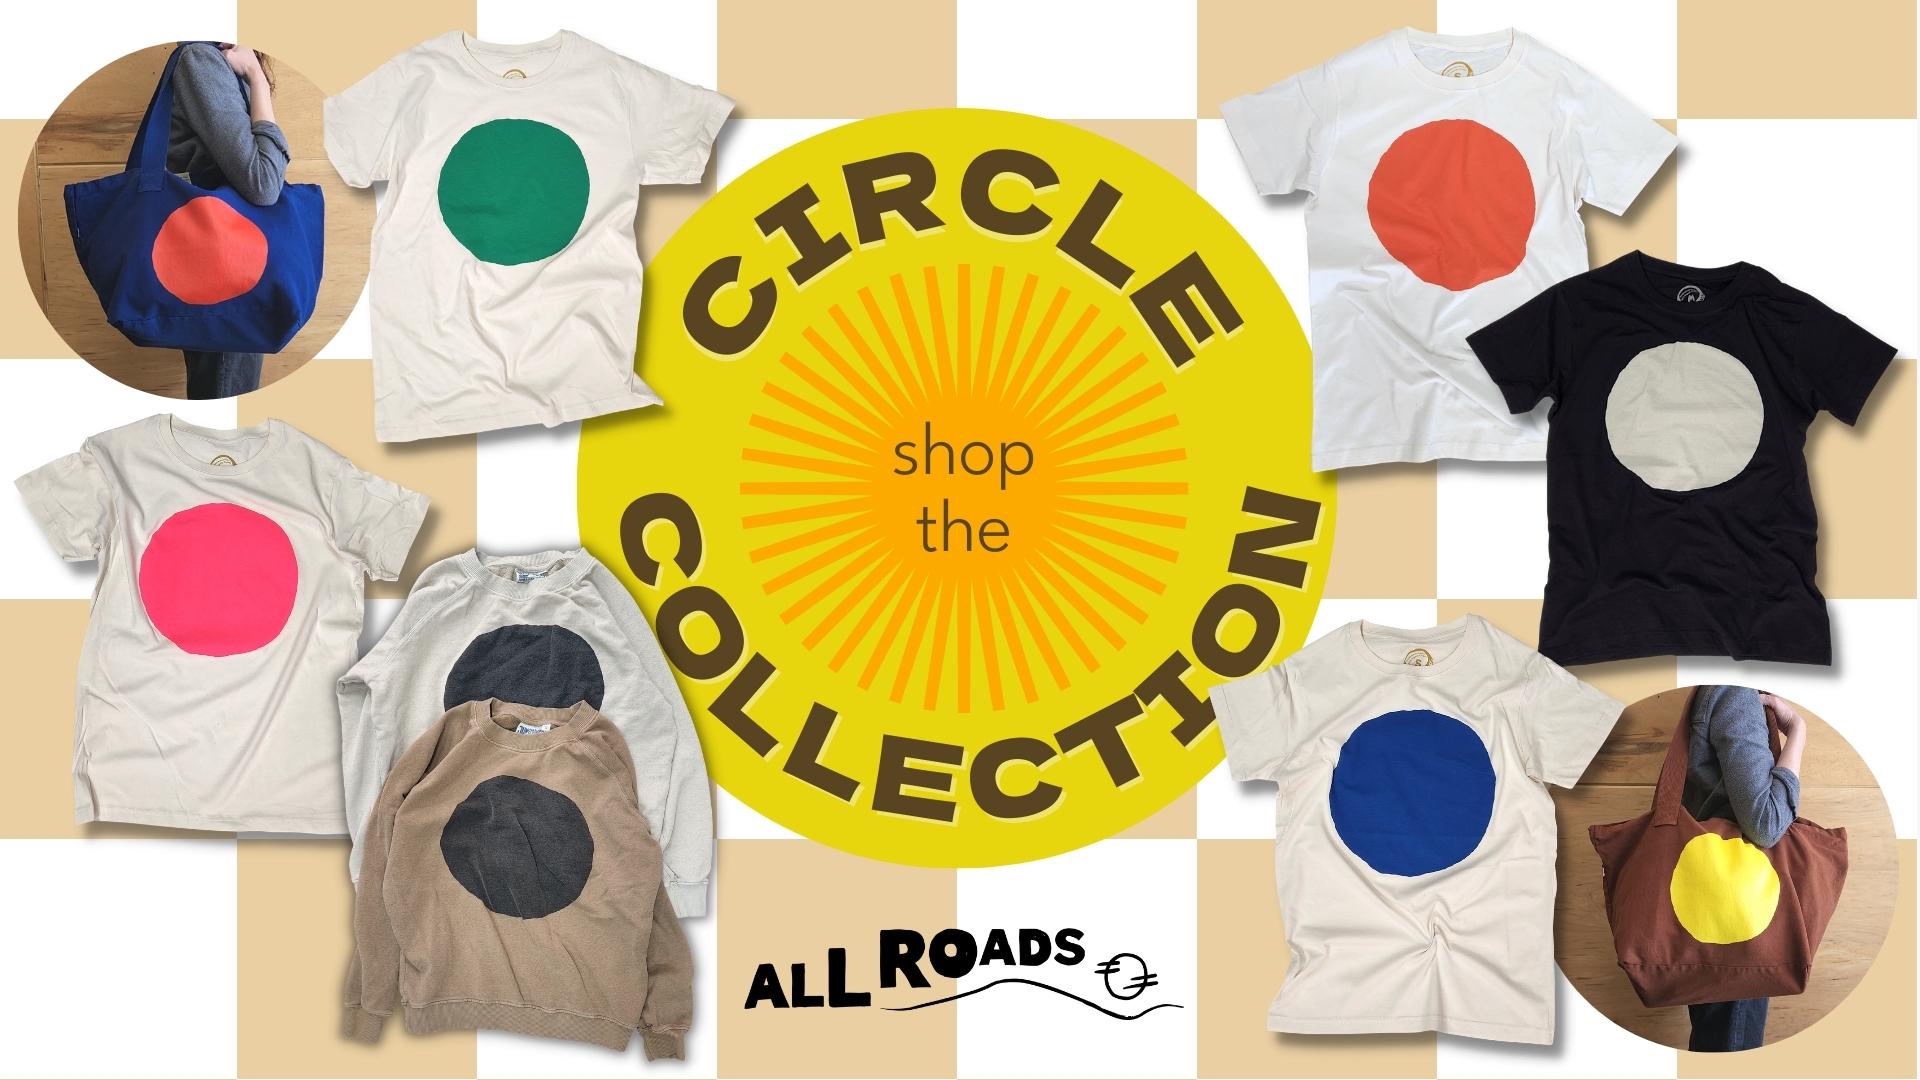 A collection of circle t-shirts and circle totes in bright fun colors